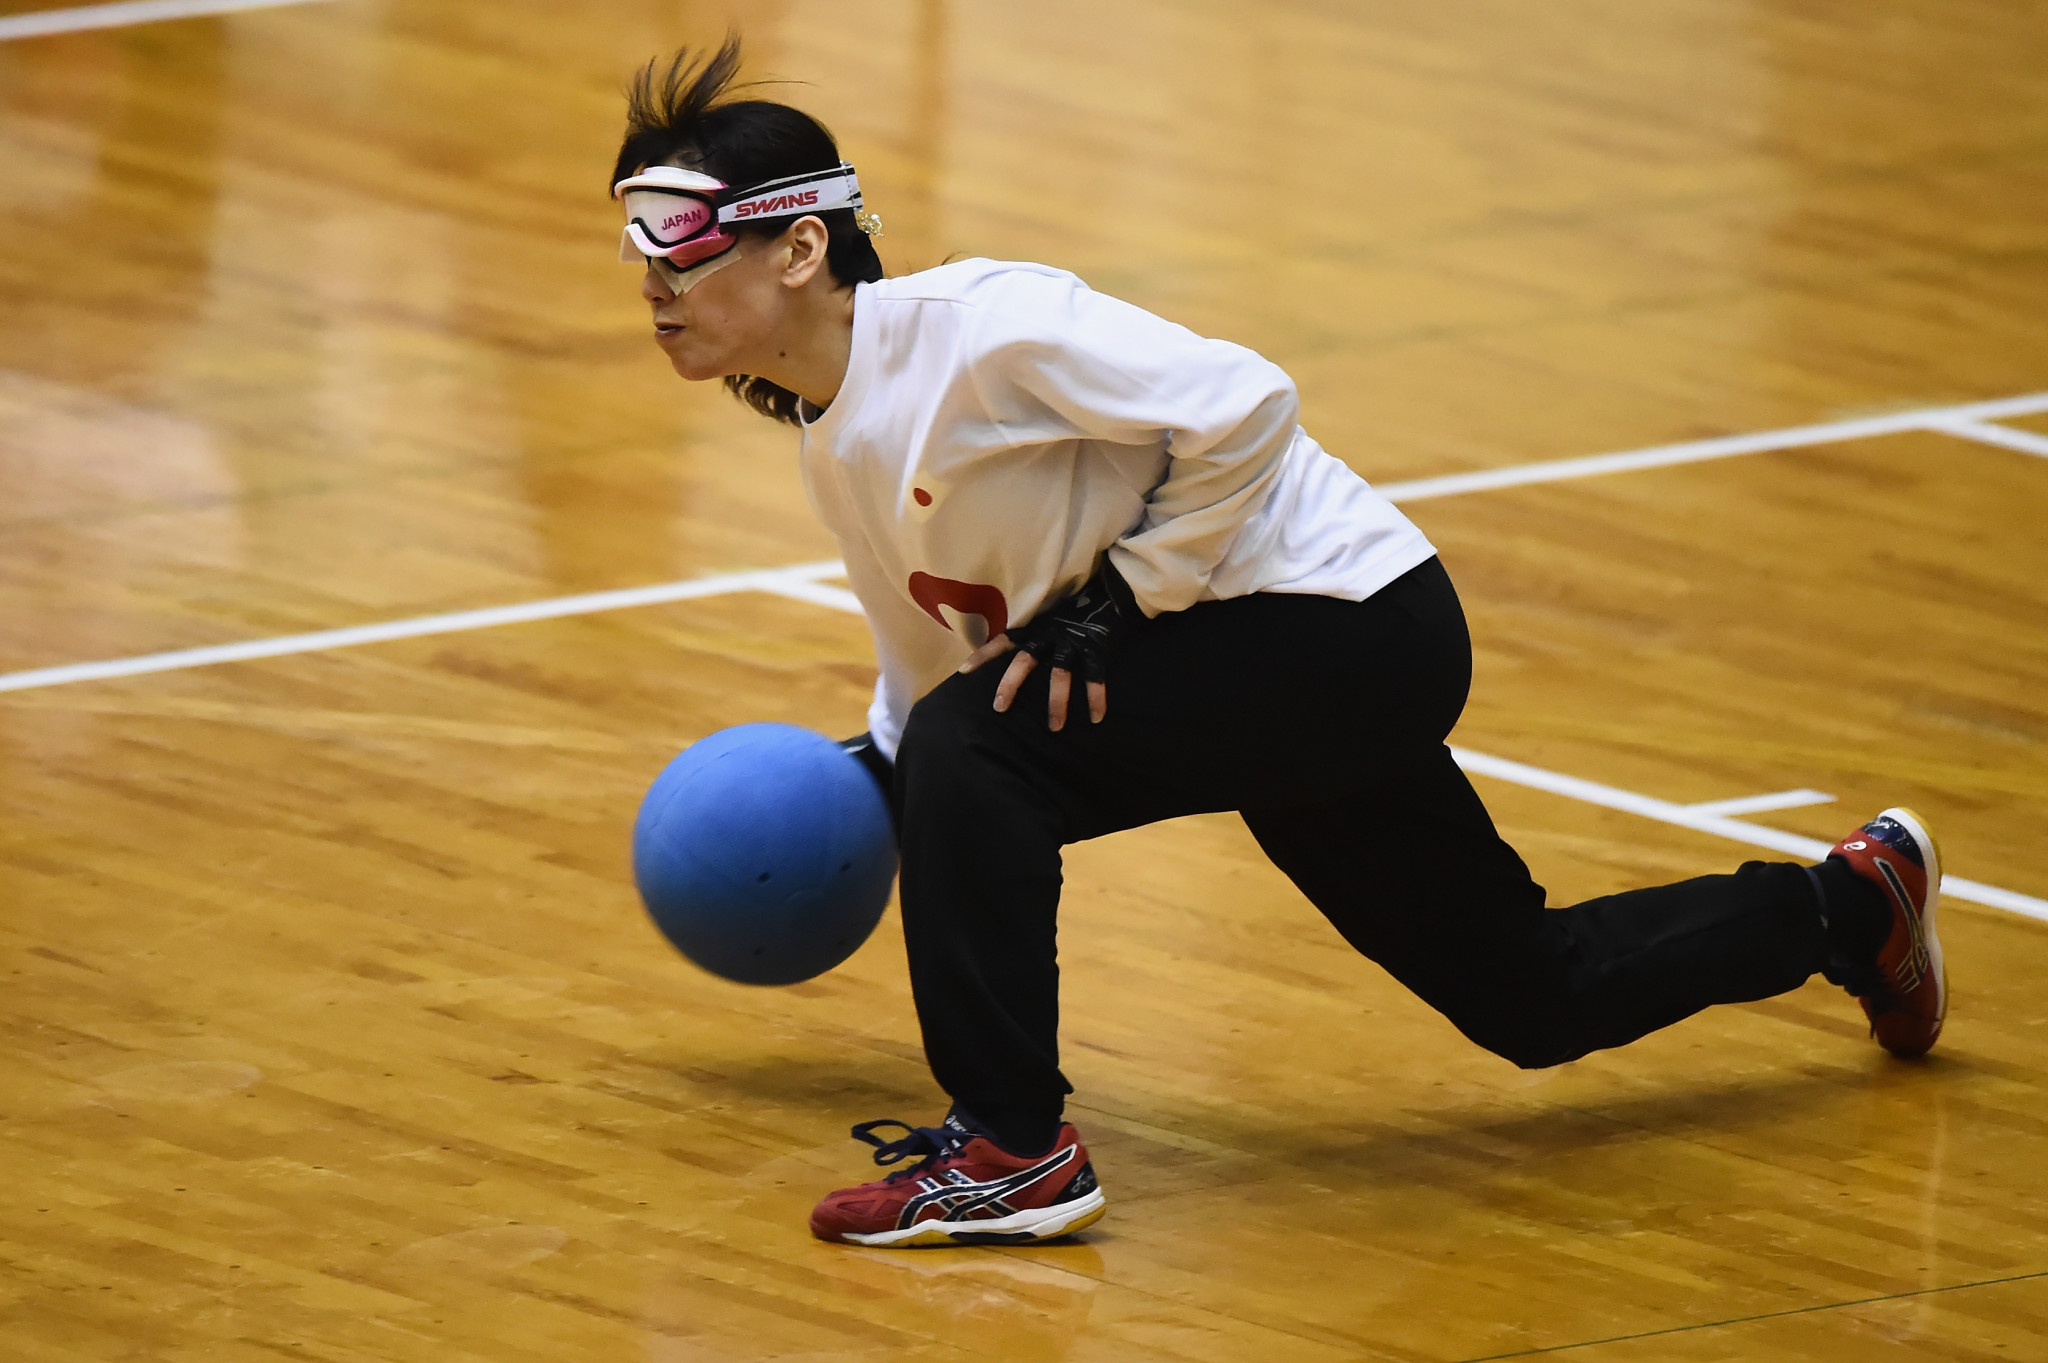 Japan will be one of four teams competing at the Tokyo 2020 goalball test event ©Getty Images